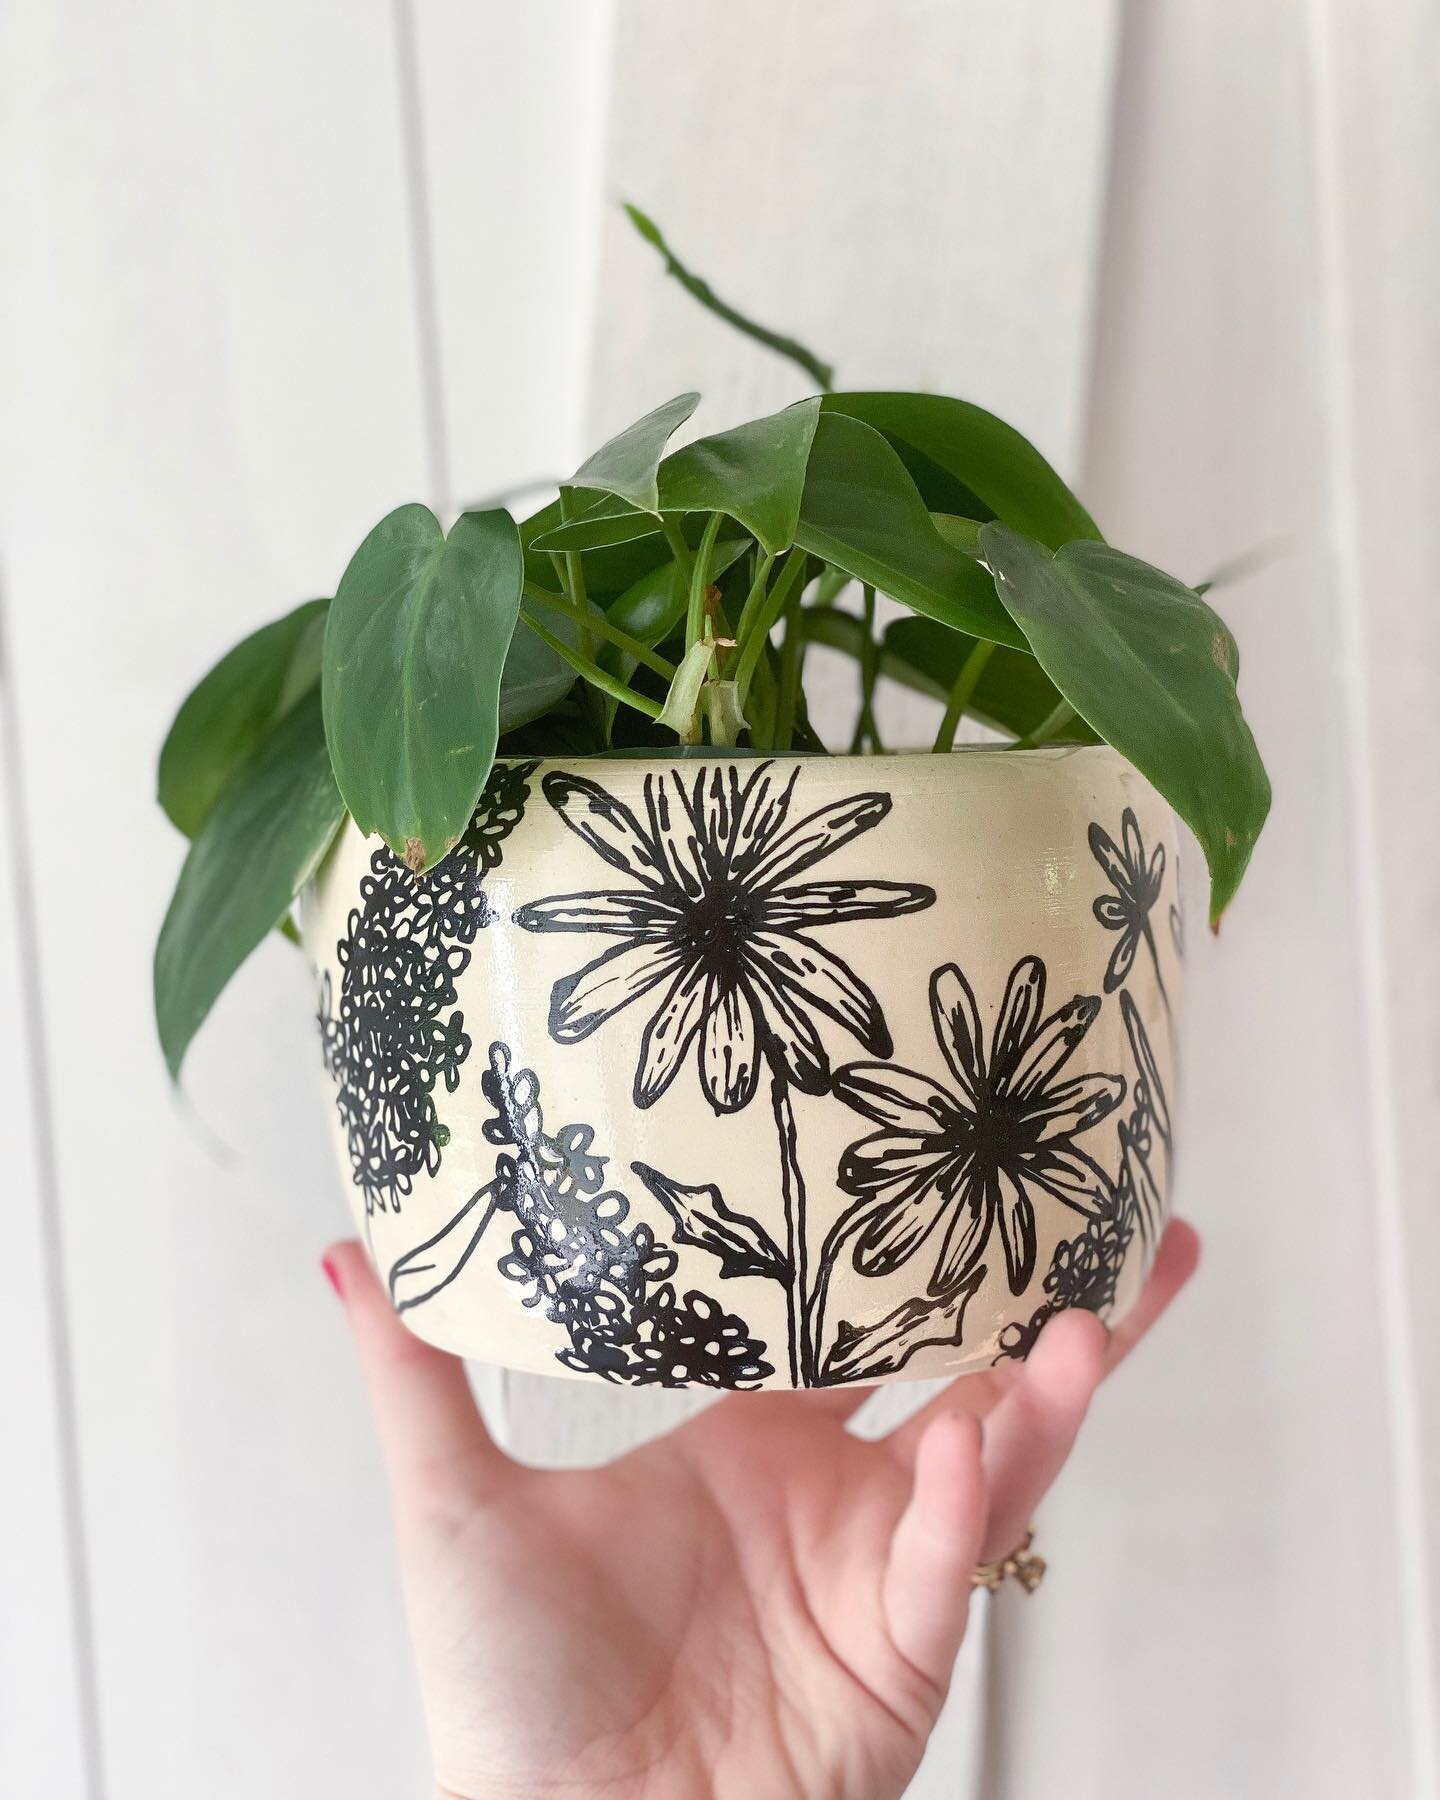 starting this Tuesday off with a little wildflower planter 🌿
.
.
.
#wildflowers #planter #handmade #madewithlove #wheelthrownpottery #victoriajadeart #thatsdarling #ceramics #tallahasseeart #tallahasseeartist #floral #floraldesign #handpainted #clay